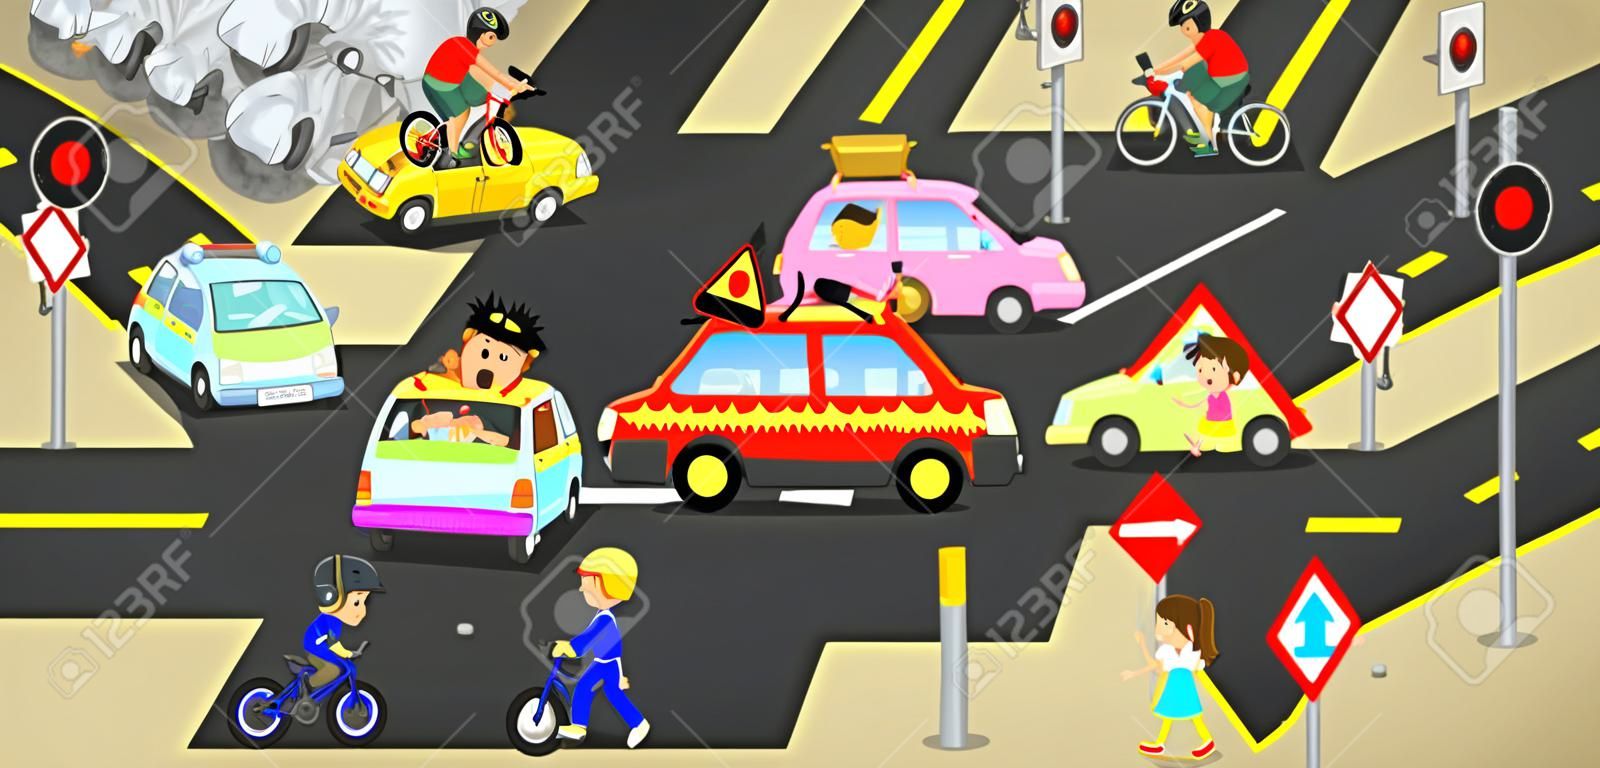 Accidents, injuries, danger and safety caution on traffic road vehicles cause by cars bicycle and careless people on urban street with sign and symbol in cute funny cartoon concept for kids, create by vector